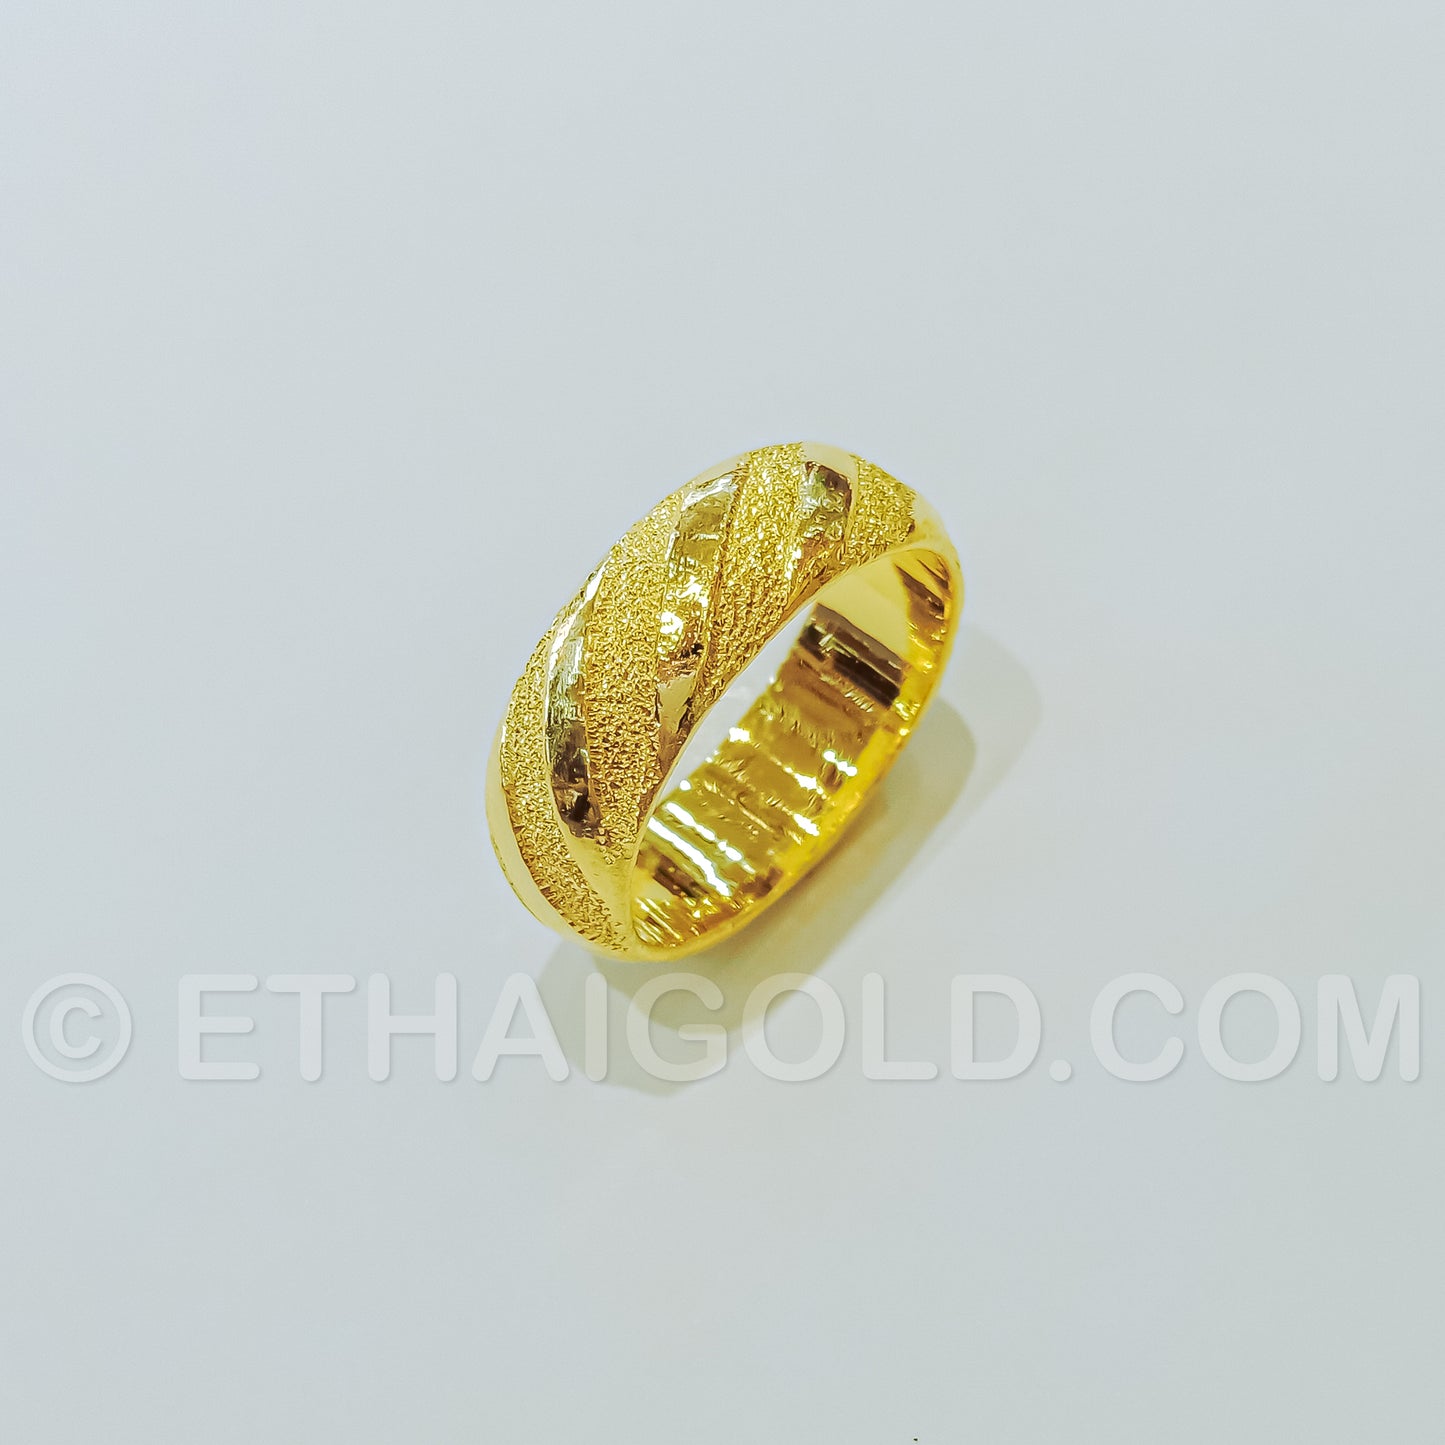 1/4 BAHT POLISHED SPARKLING SOLID STRIPED DOMED WEDDING BAND RING IN 23K GOLD (ID: R0101S)